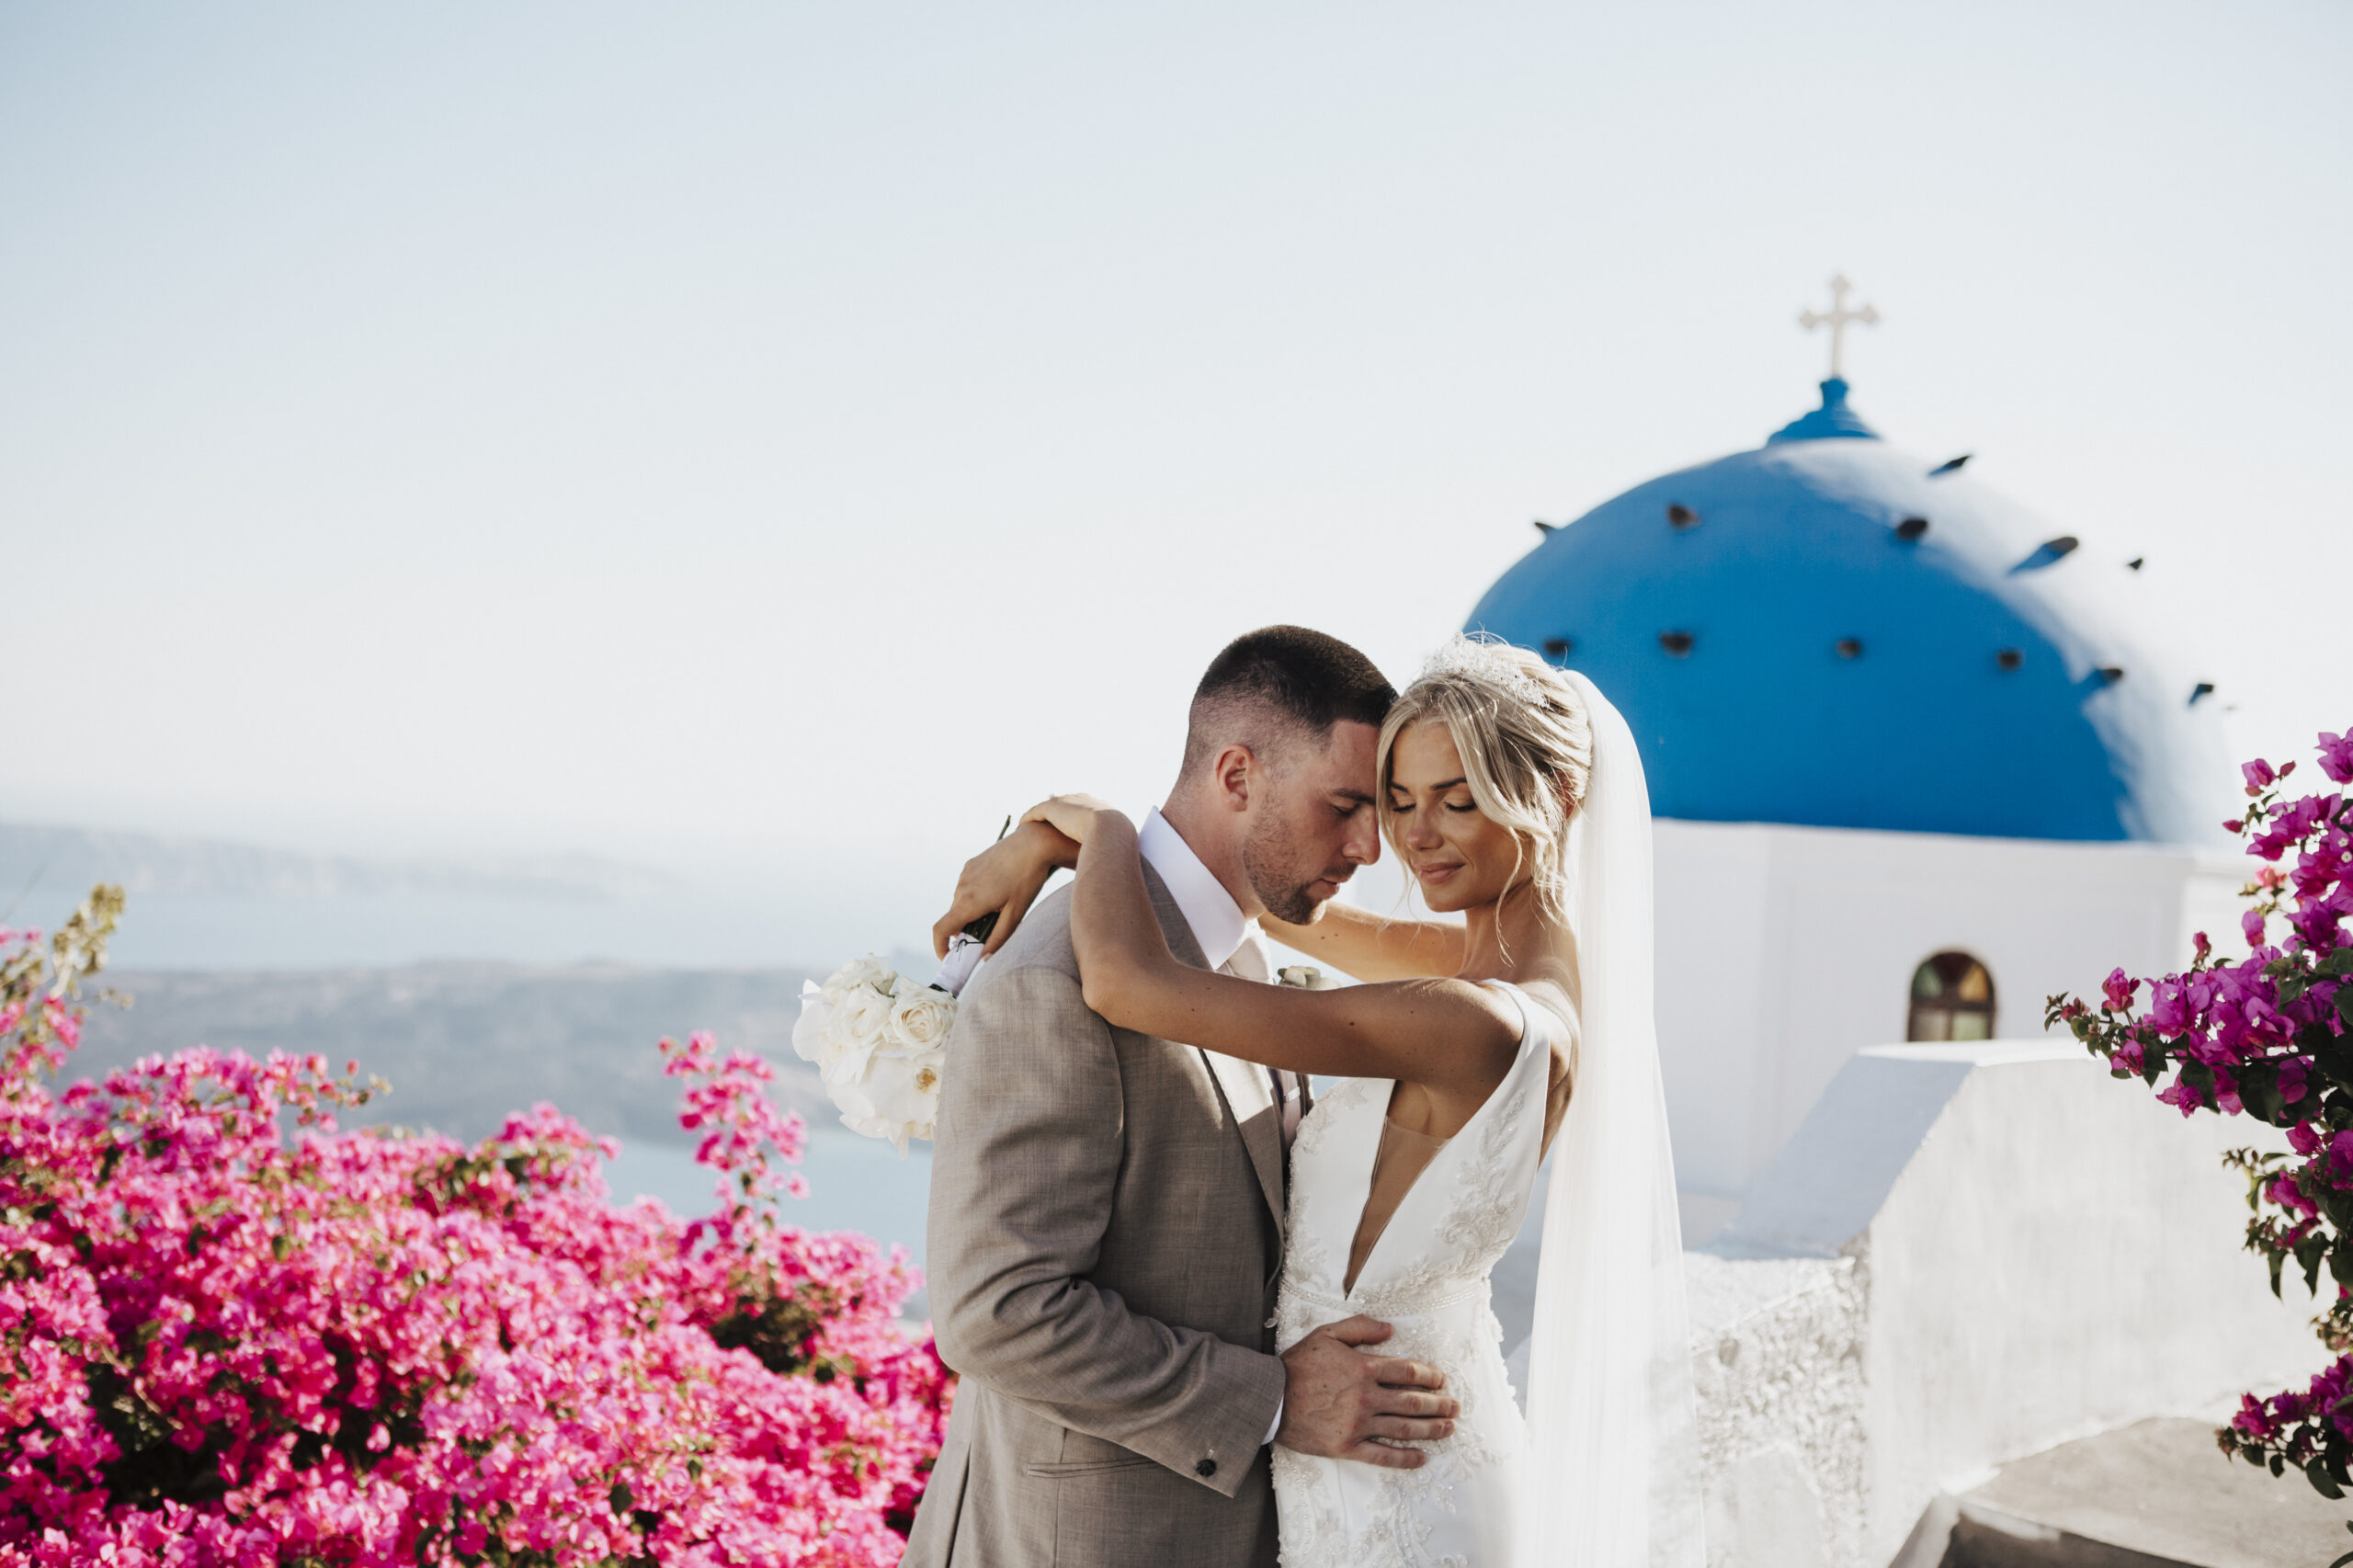 bride and groom embracing with a blue and white Santorini building behind them